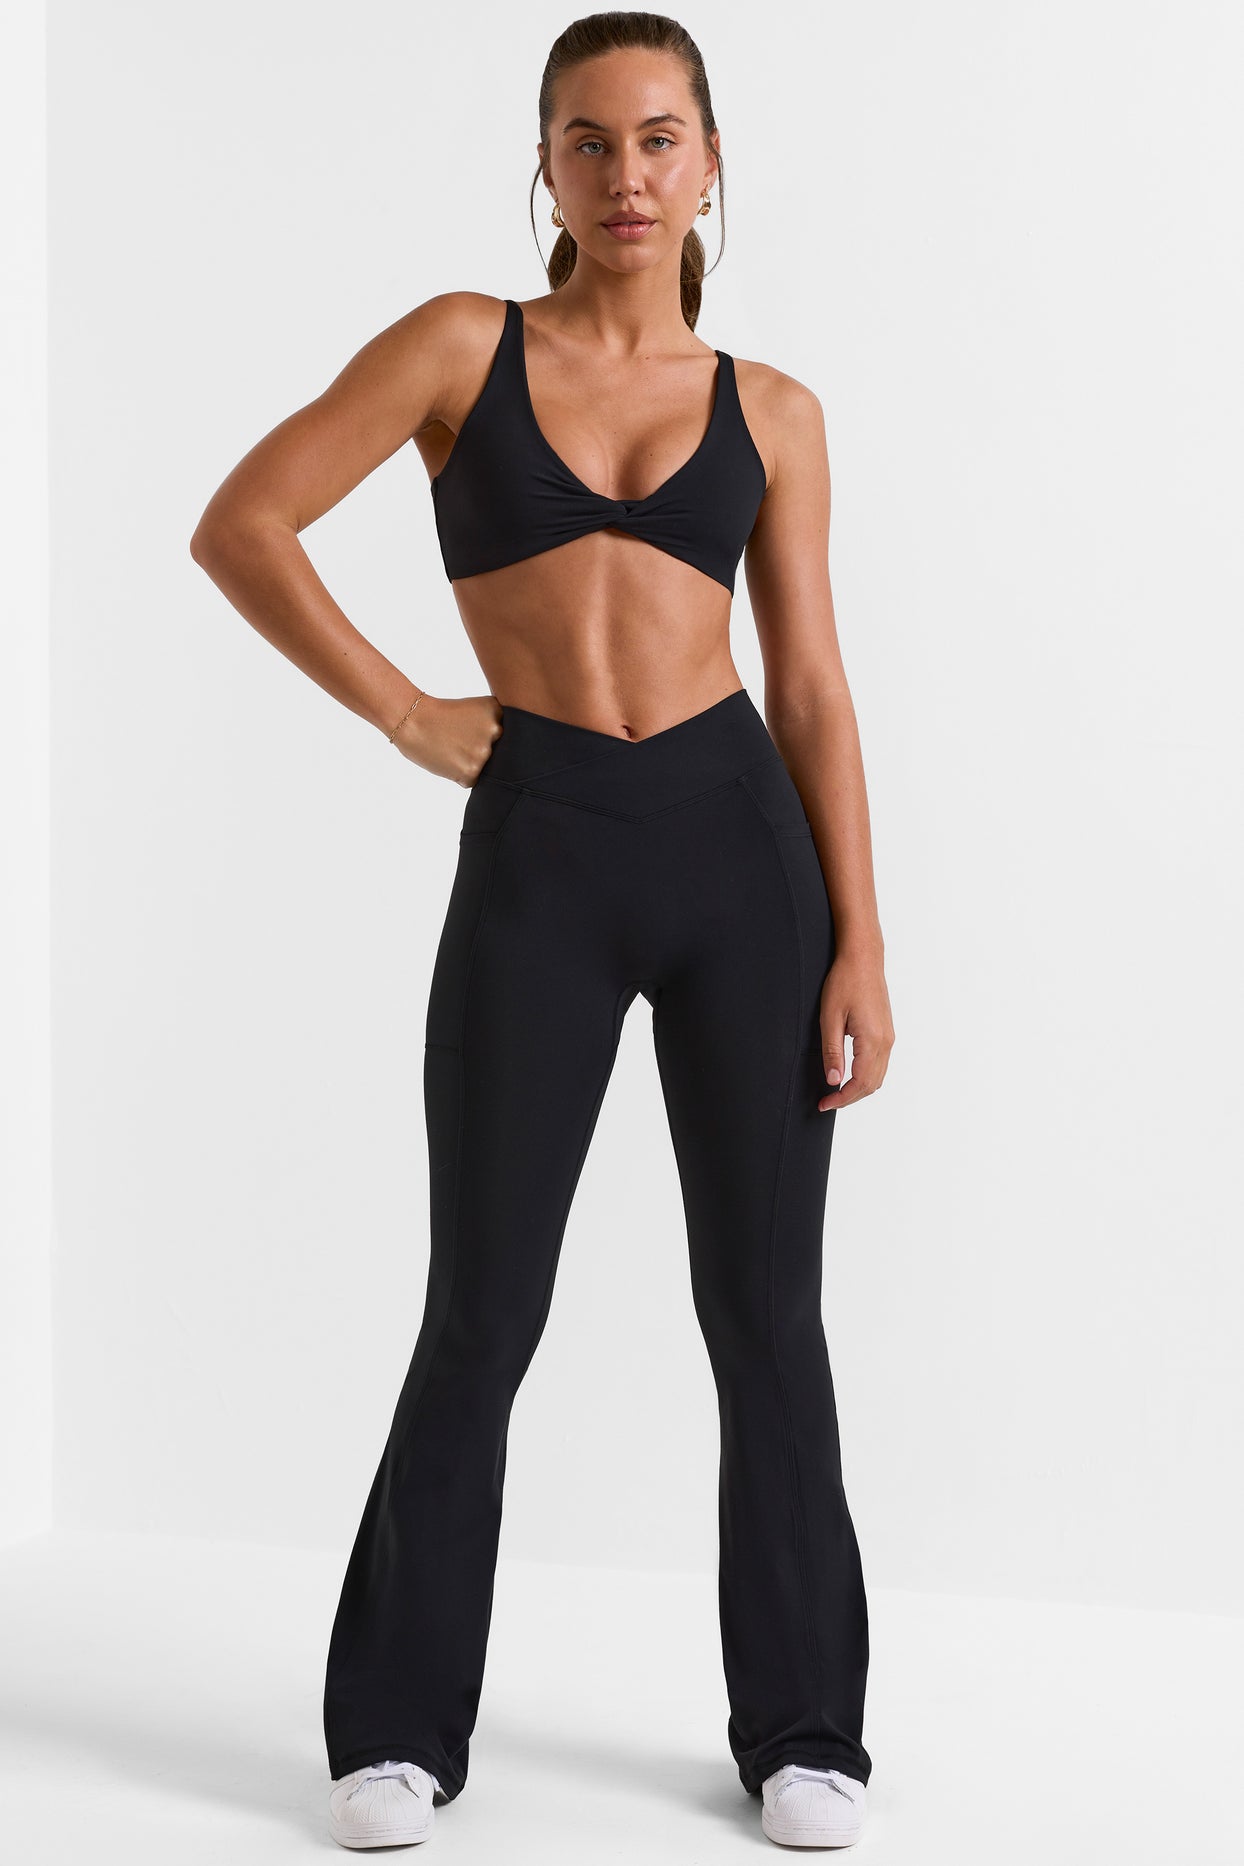 Buy High Waist Leggings, Womens Running Tights with Pockets Power